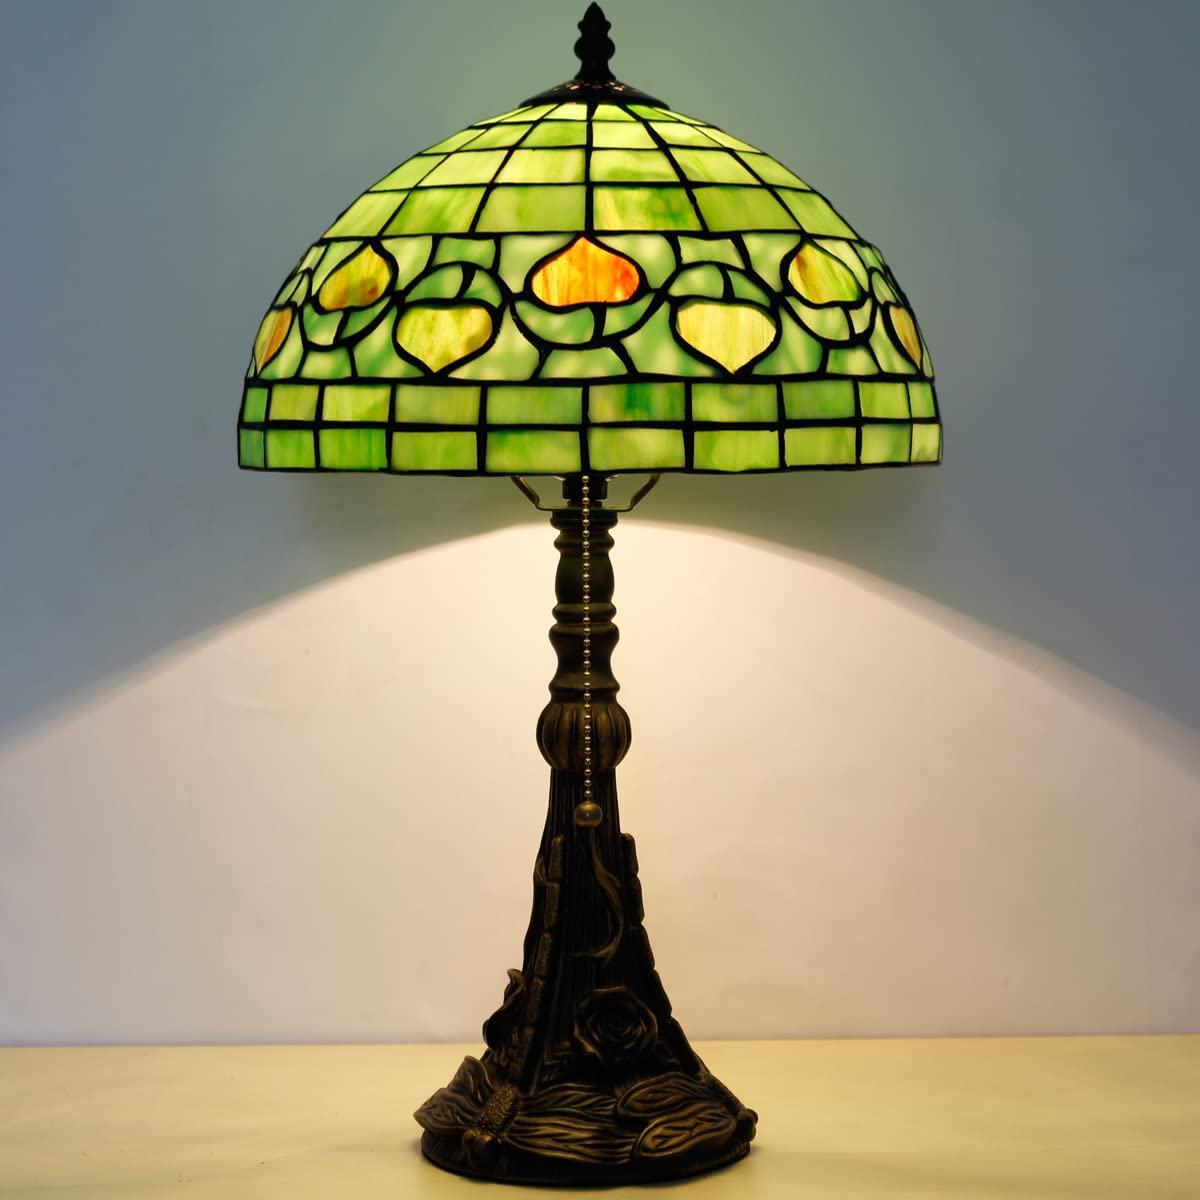 Werfactory® Tiffany Style Table Lamp W12H19 inch Green Stained Glass Antique Light